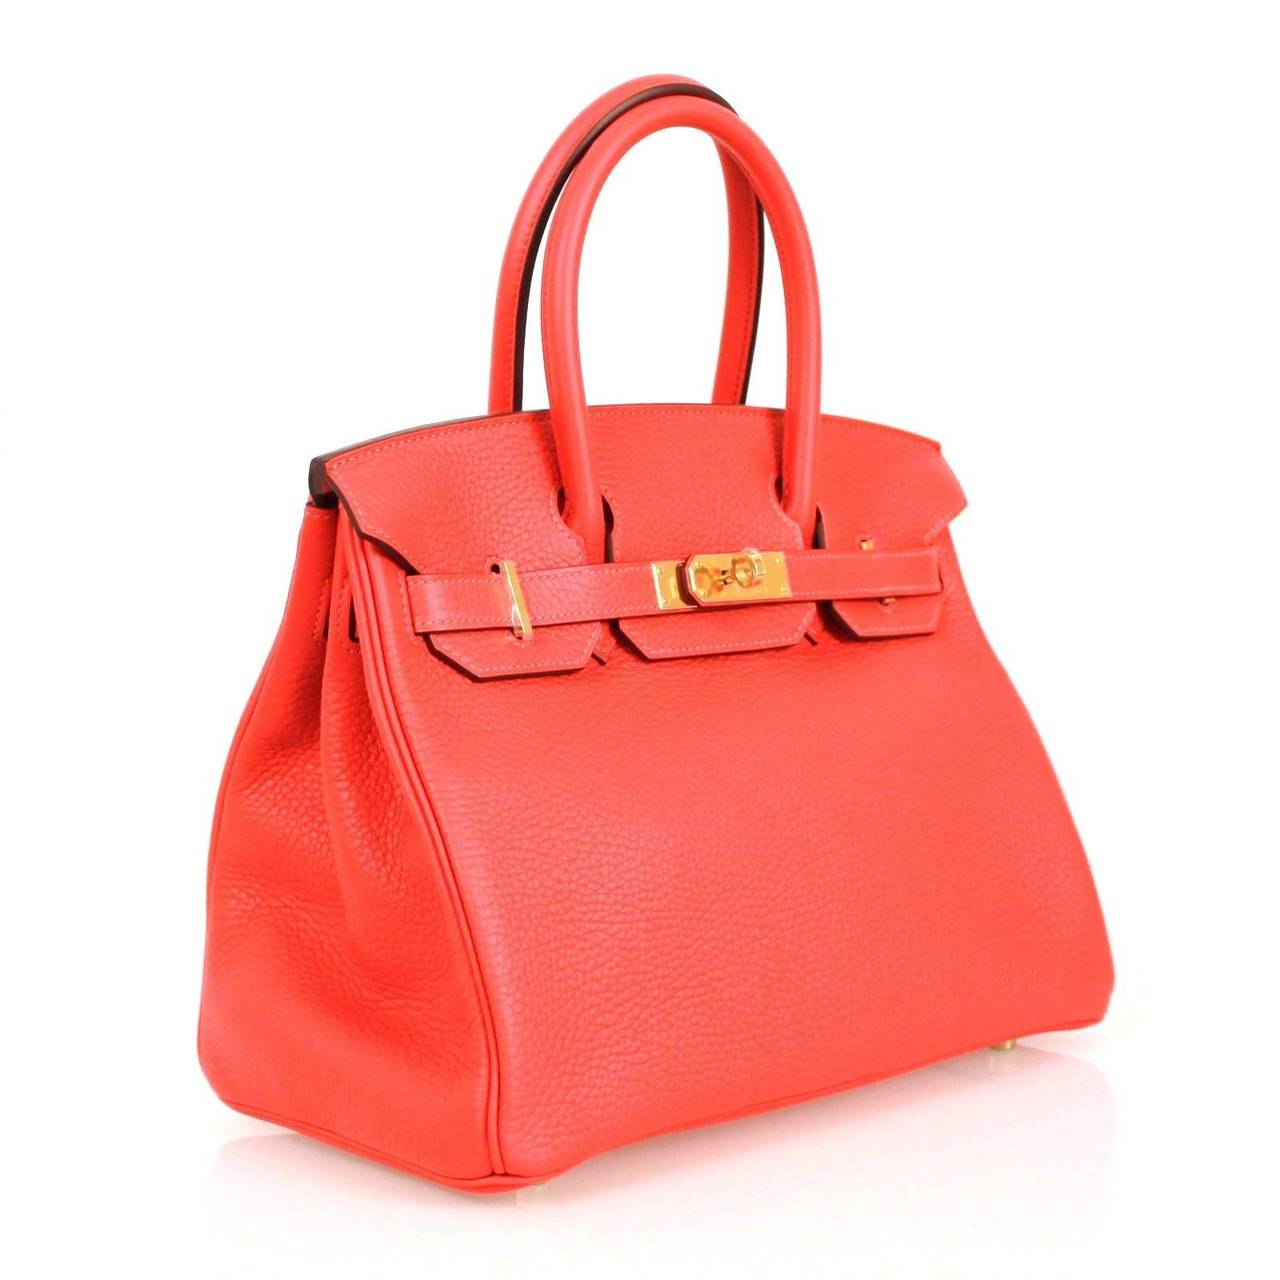 This is an authentic Hermes Togo Leather Classic Birkin 30 in Rogue Pivione. This Birkin clemence leather in rouge pivione with trim found at the piping, side gussets, top handles and straps. The bag features rolled top handles, a strap closure with